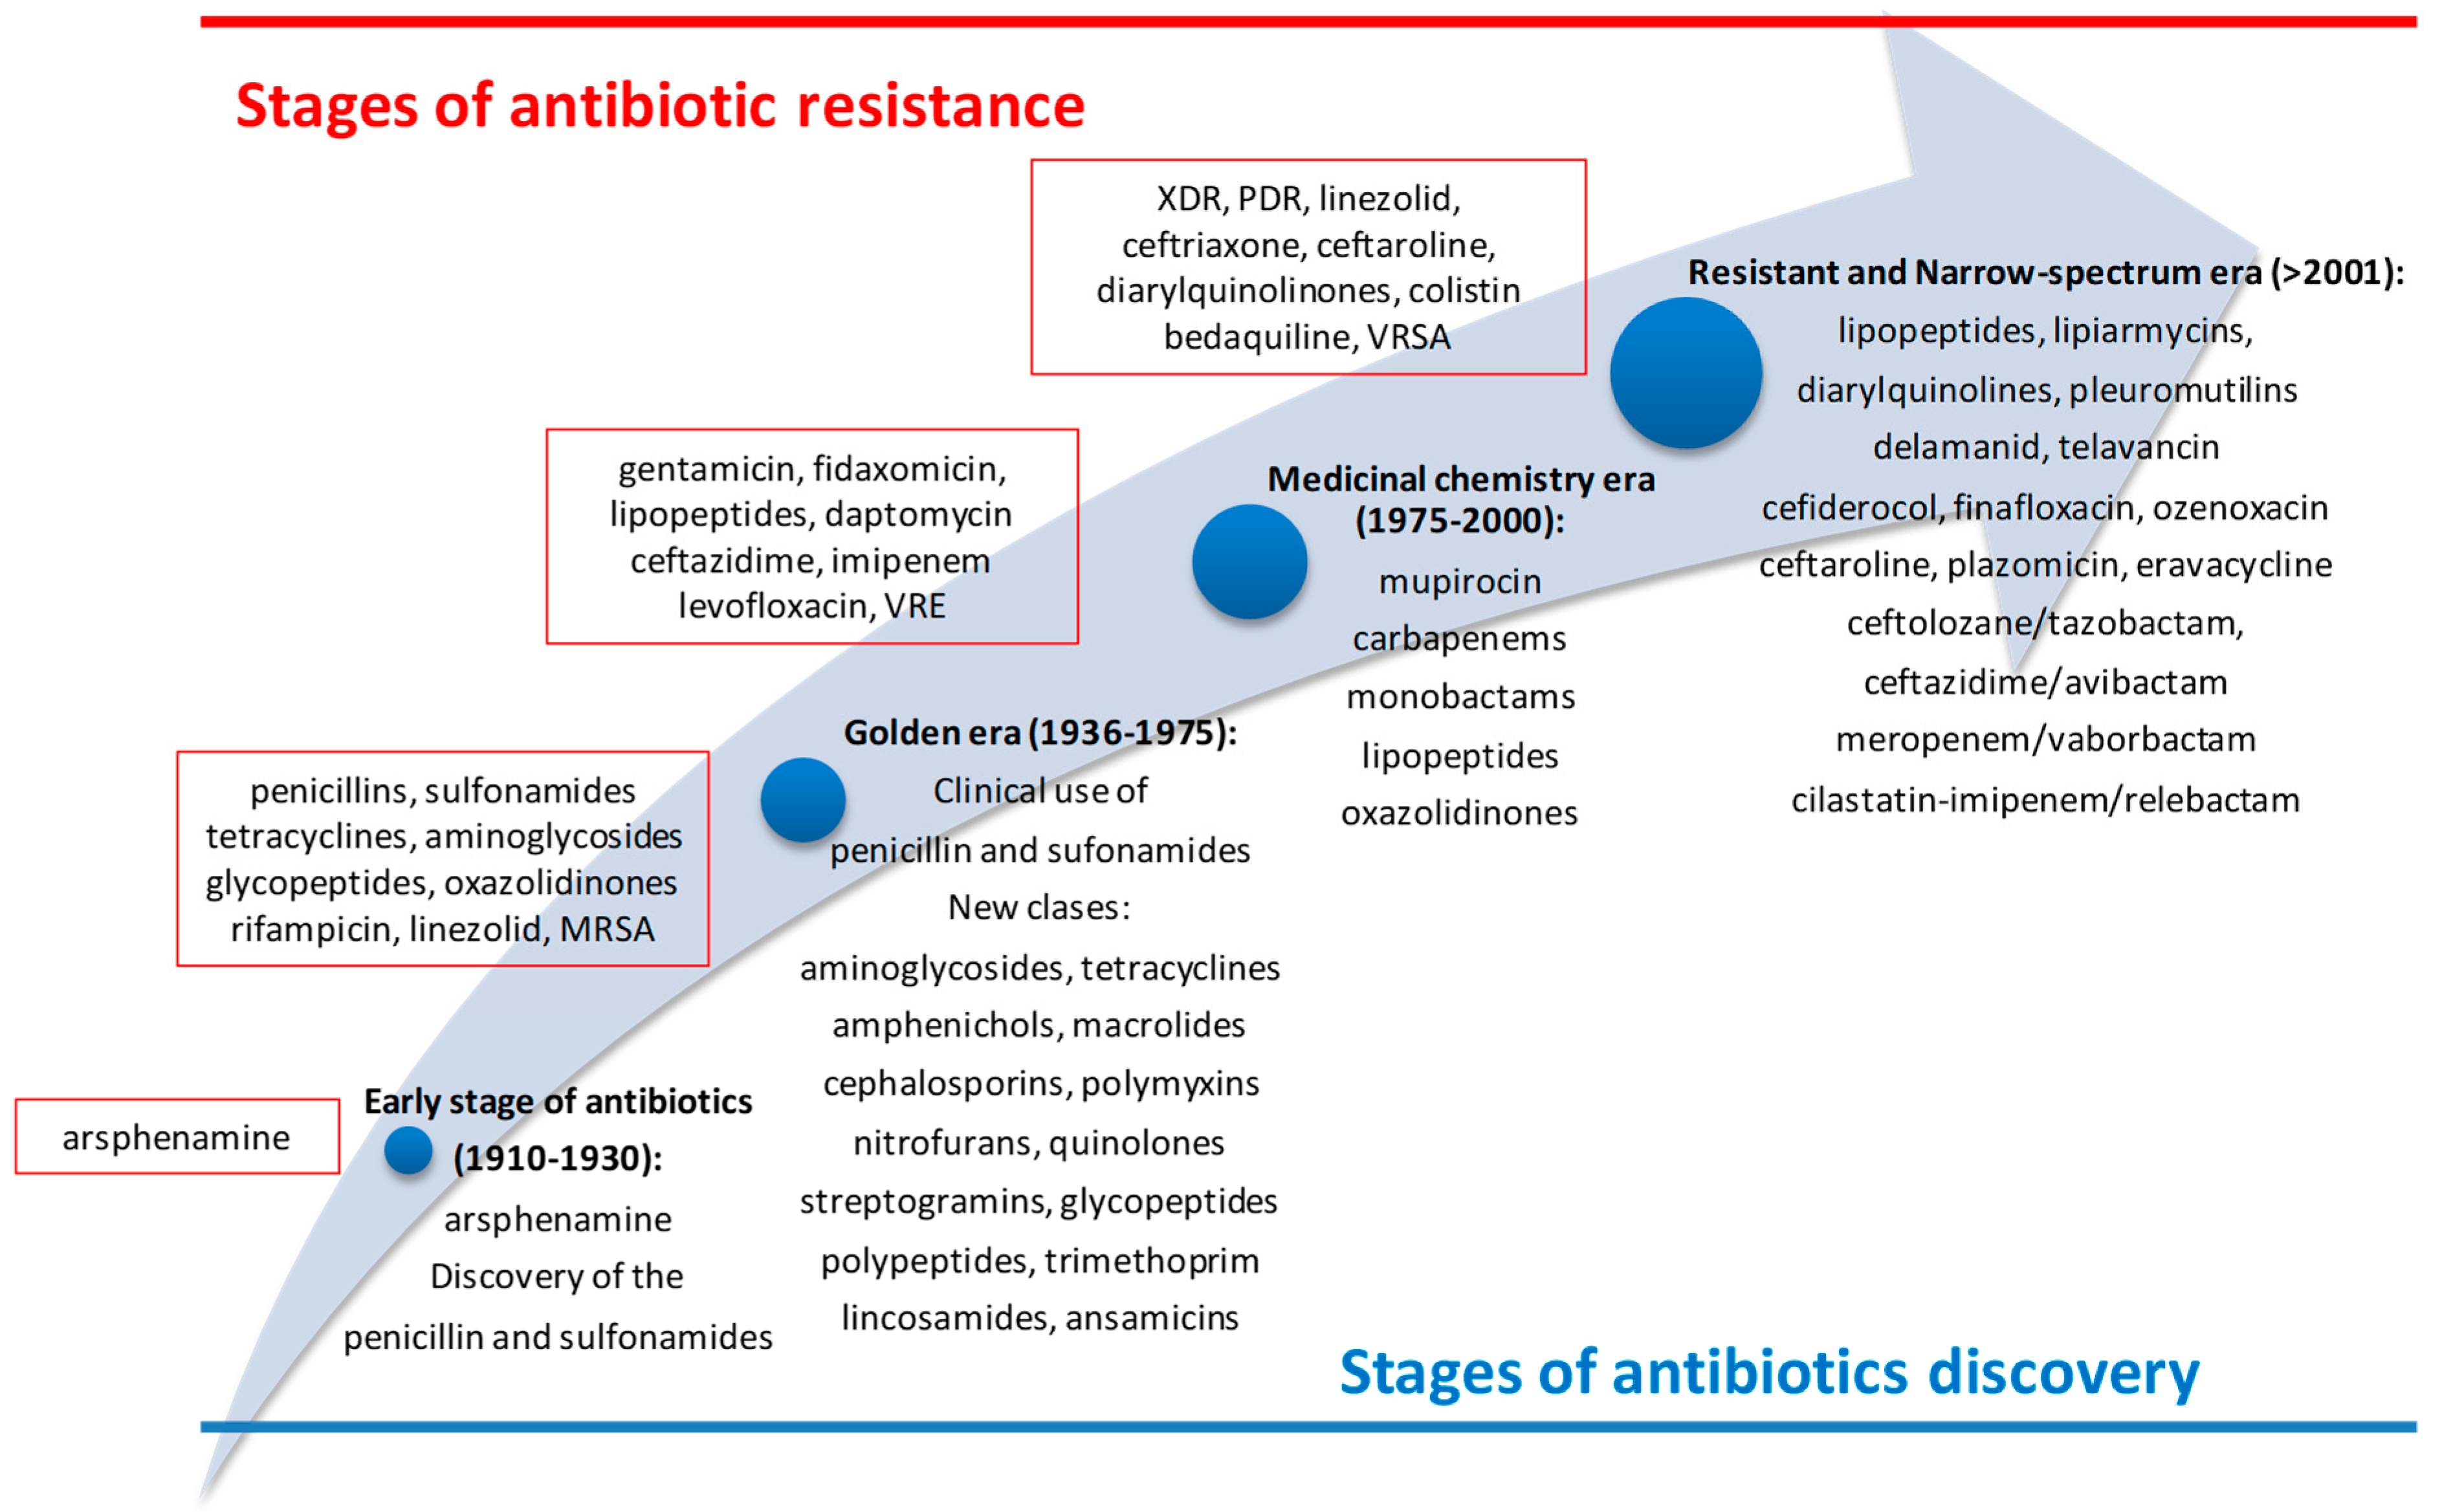 Trial of existing antibiotic for treating Staphylococcus aureus bacteremia  begins